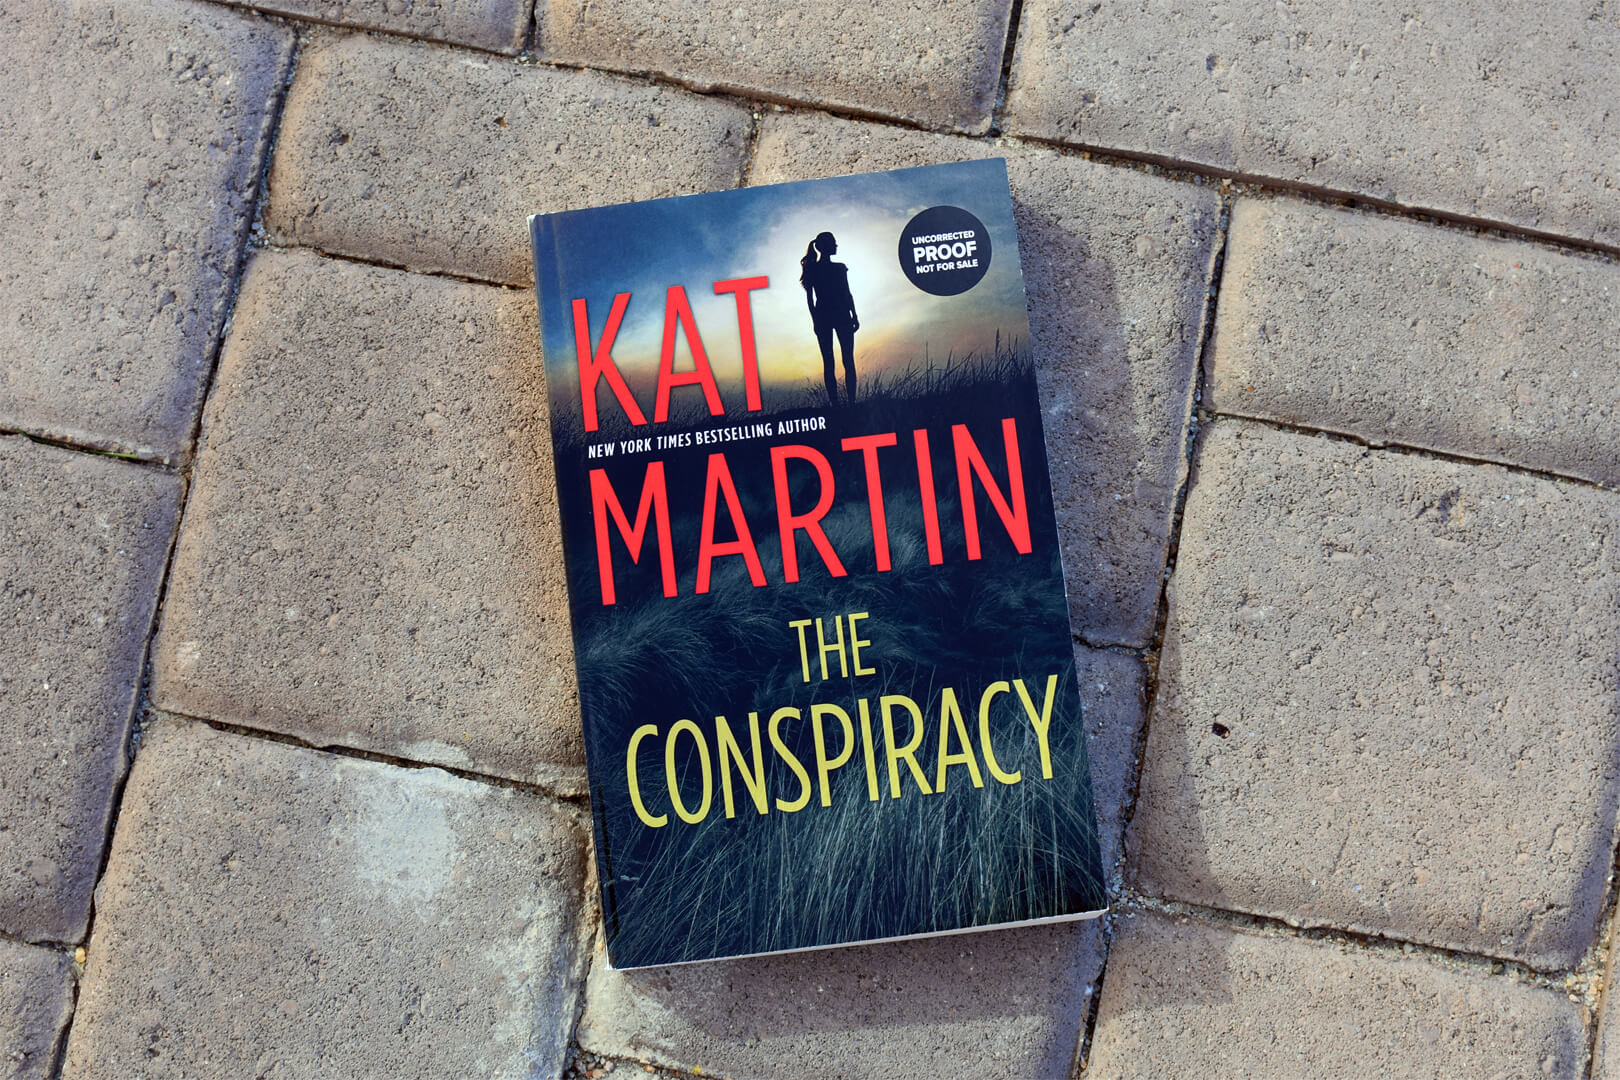 Kat Martin’s The Conspiracy: Flash Review and Book Club Questions